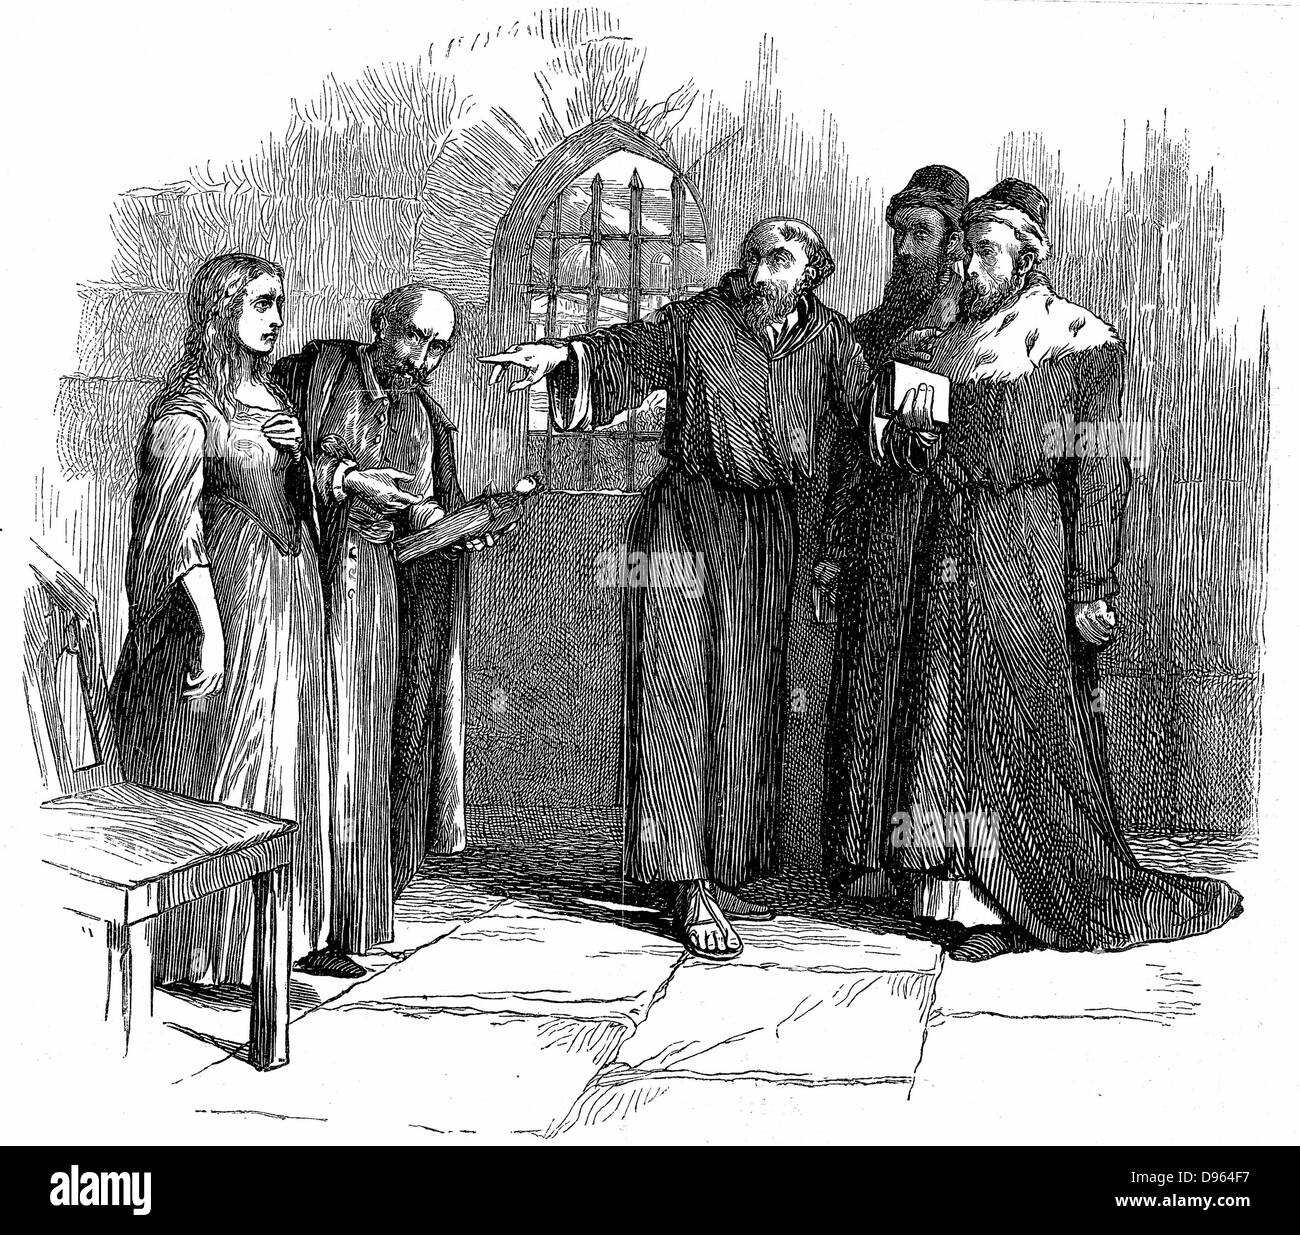 Persecution of Waldenses (Valdenses, Vaudois, Valdesi) by the Roman Catholic church. Lucrezia Castellani accused of heresy before Inquisitors at Turin after taking part in a banned Waldenses service. Condemned and burnt at the stake c1476. 19th century engraving. Stock Photo